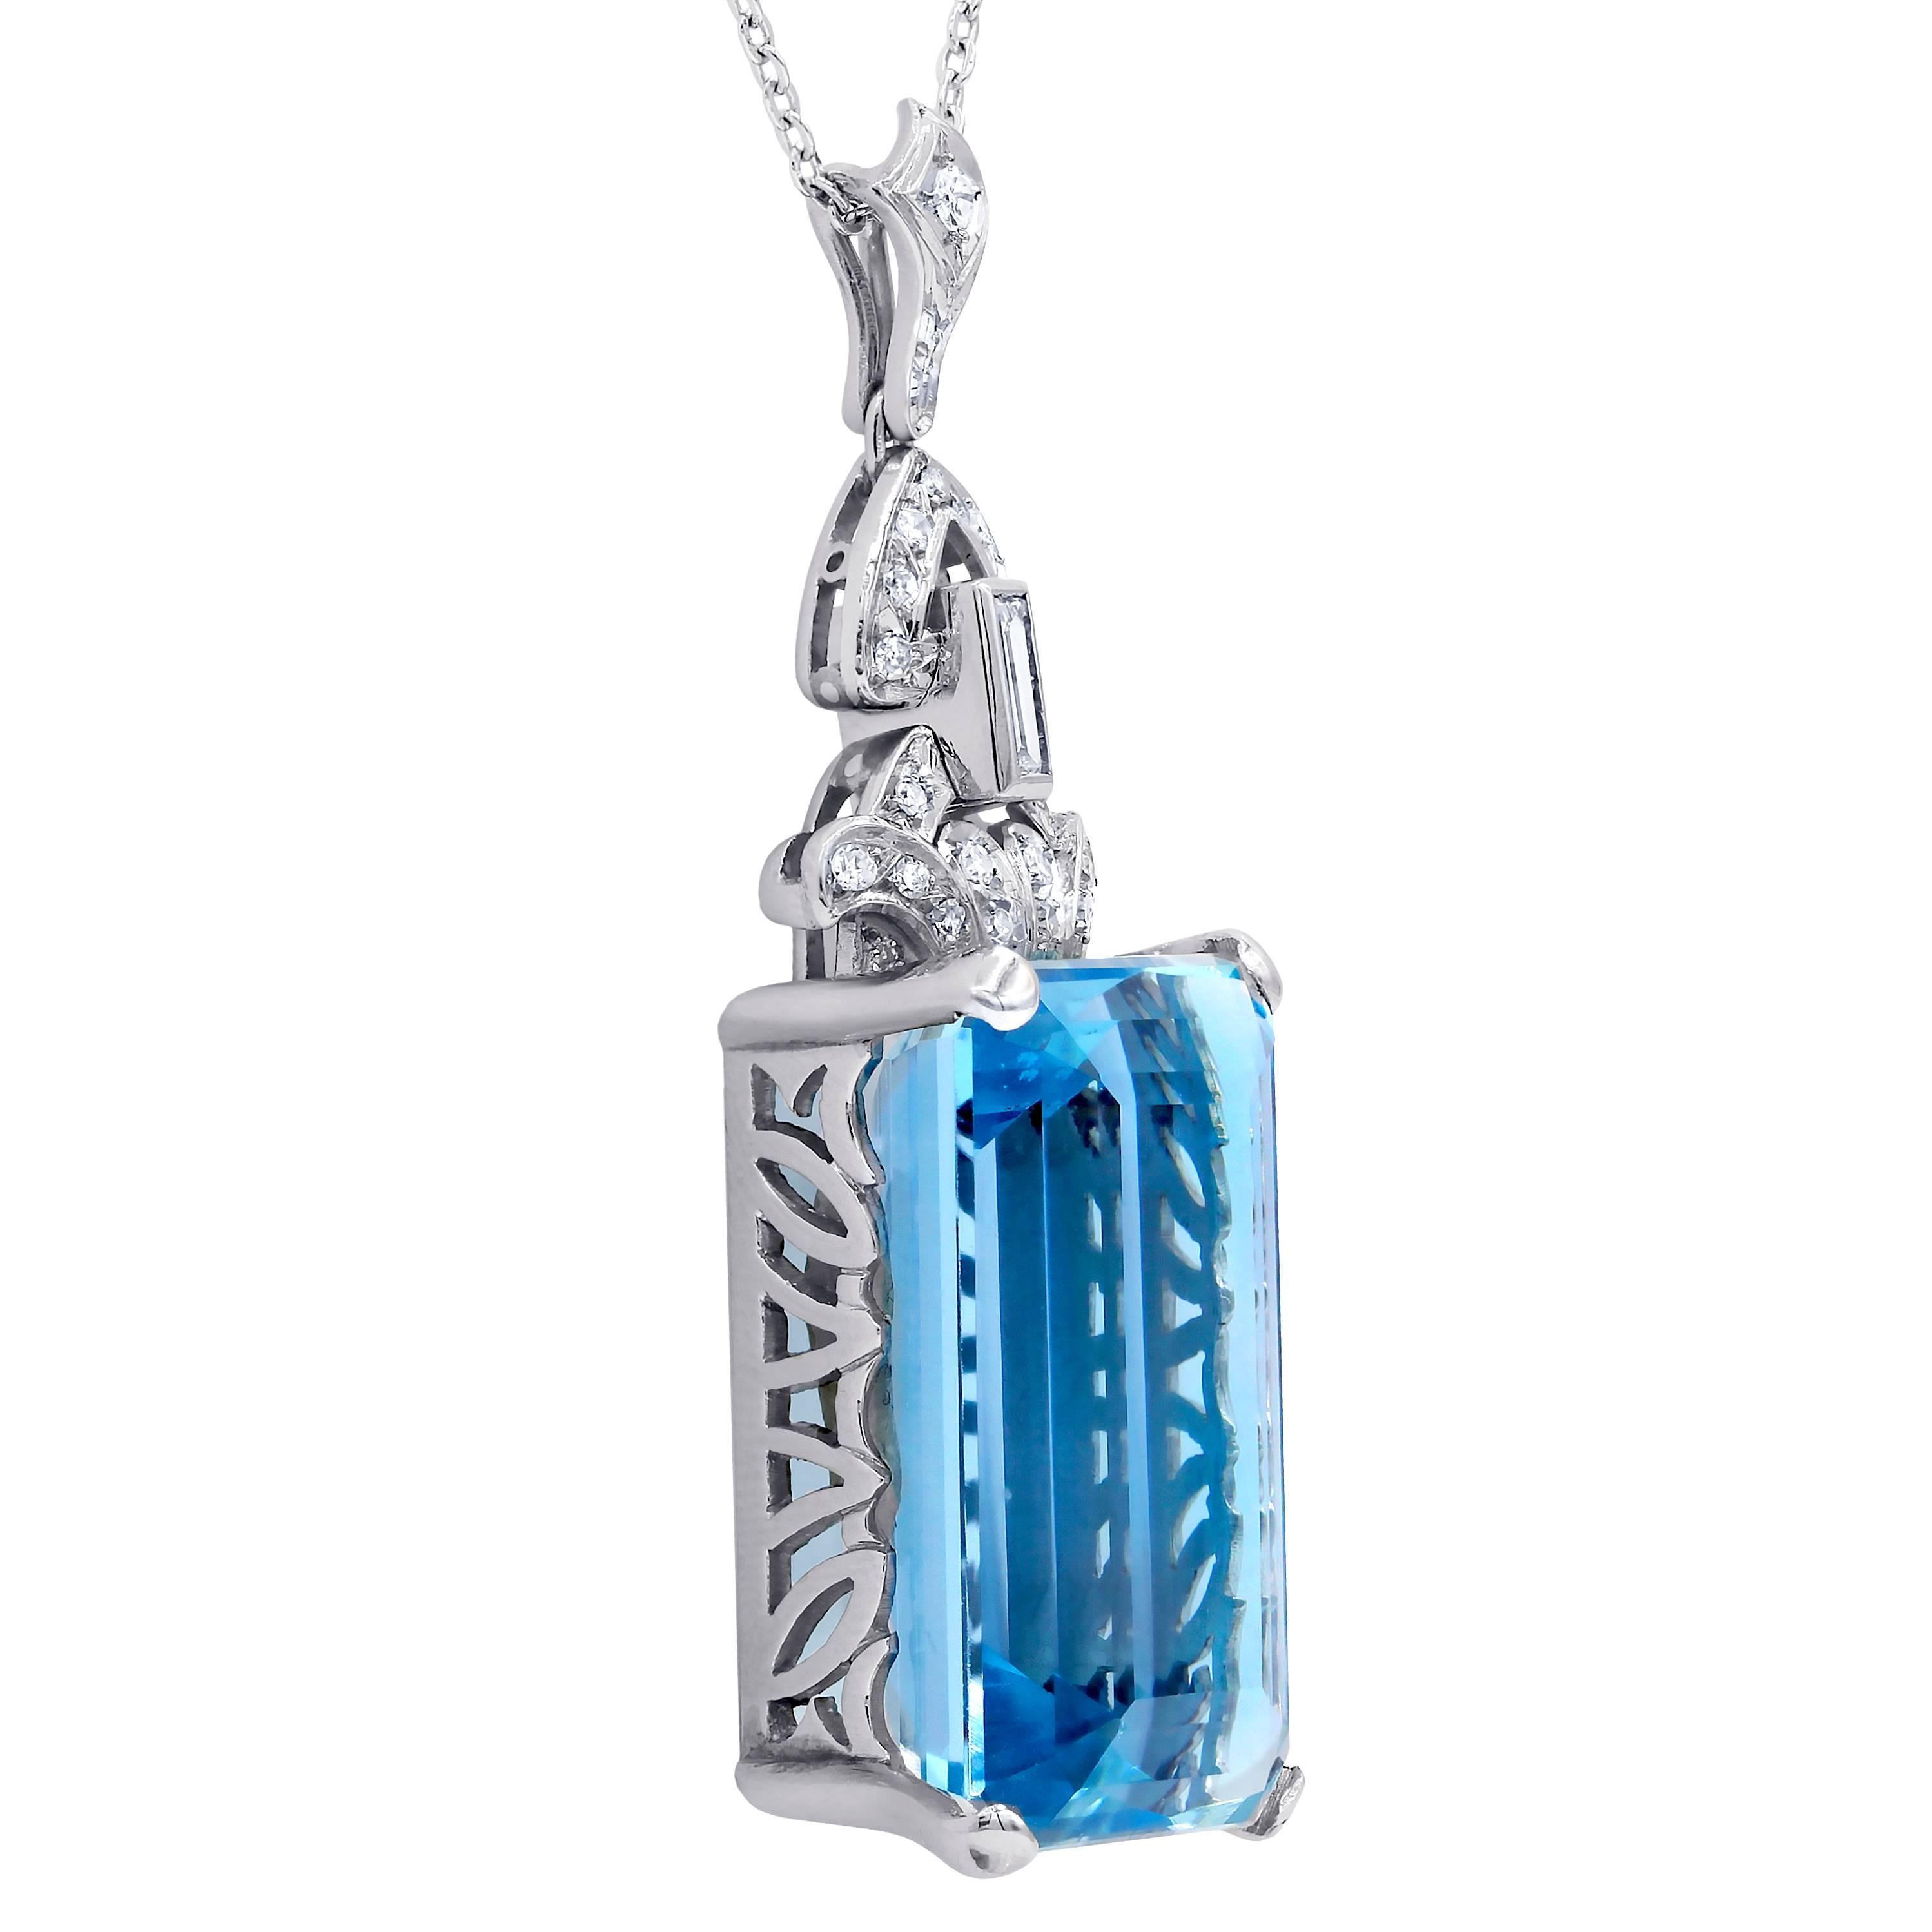 Finest quality aquamarine and diamond pendant features 42.80 Carats Aquamarine, fine color and clarity, set with 0.50 carats of micro pave round diamonds. 
